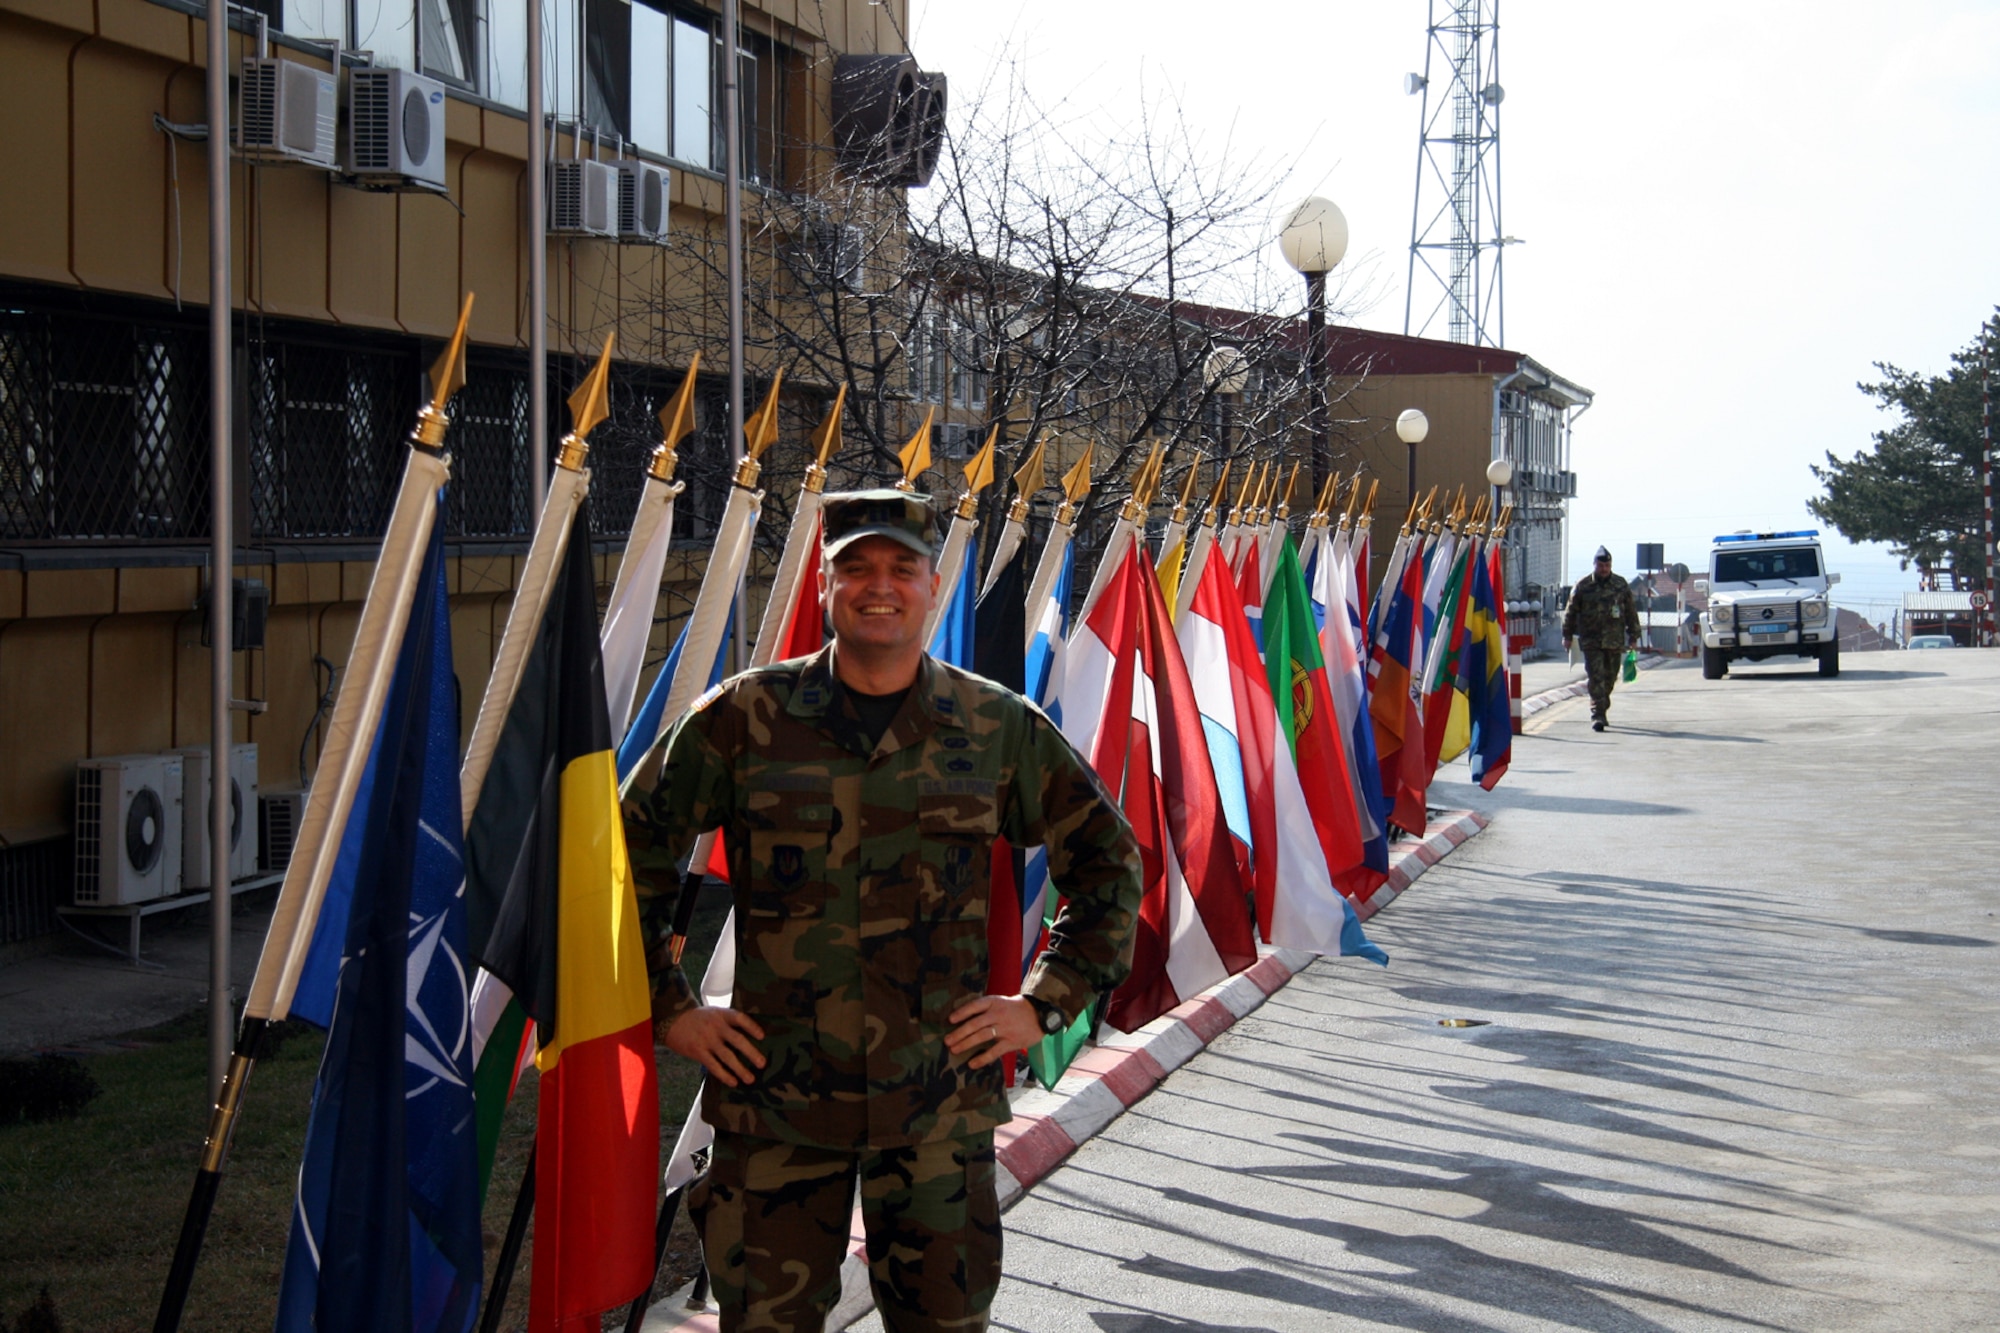 PRISTINA, Kosovo -- Capt. Richard Barnhart, from Spangdahlem’s 52nd Contracting Squadron, stands in front of the Kosovo Forces headquarters building at Film City, in Pristina, Kosovo. The captain, who is currently deployed to Kosovo, describes how the atmosphere feels in the capital city following the country’s announcement of independence. (Courtesy photo)